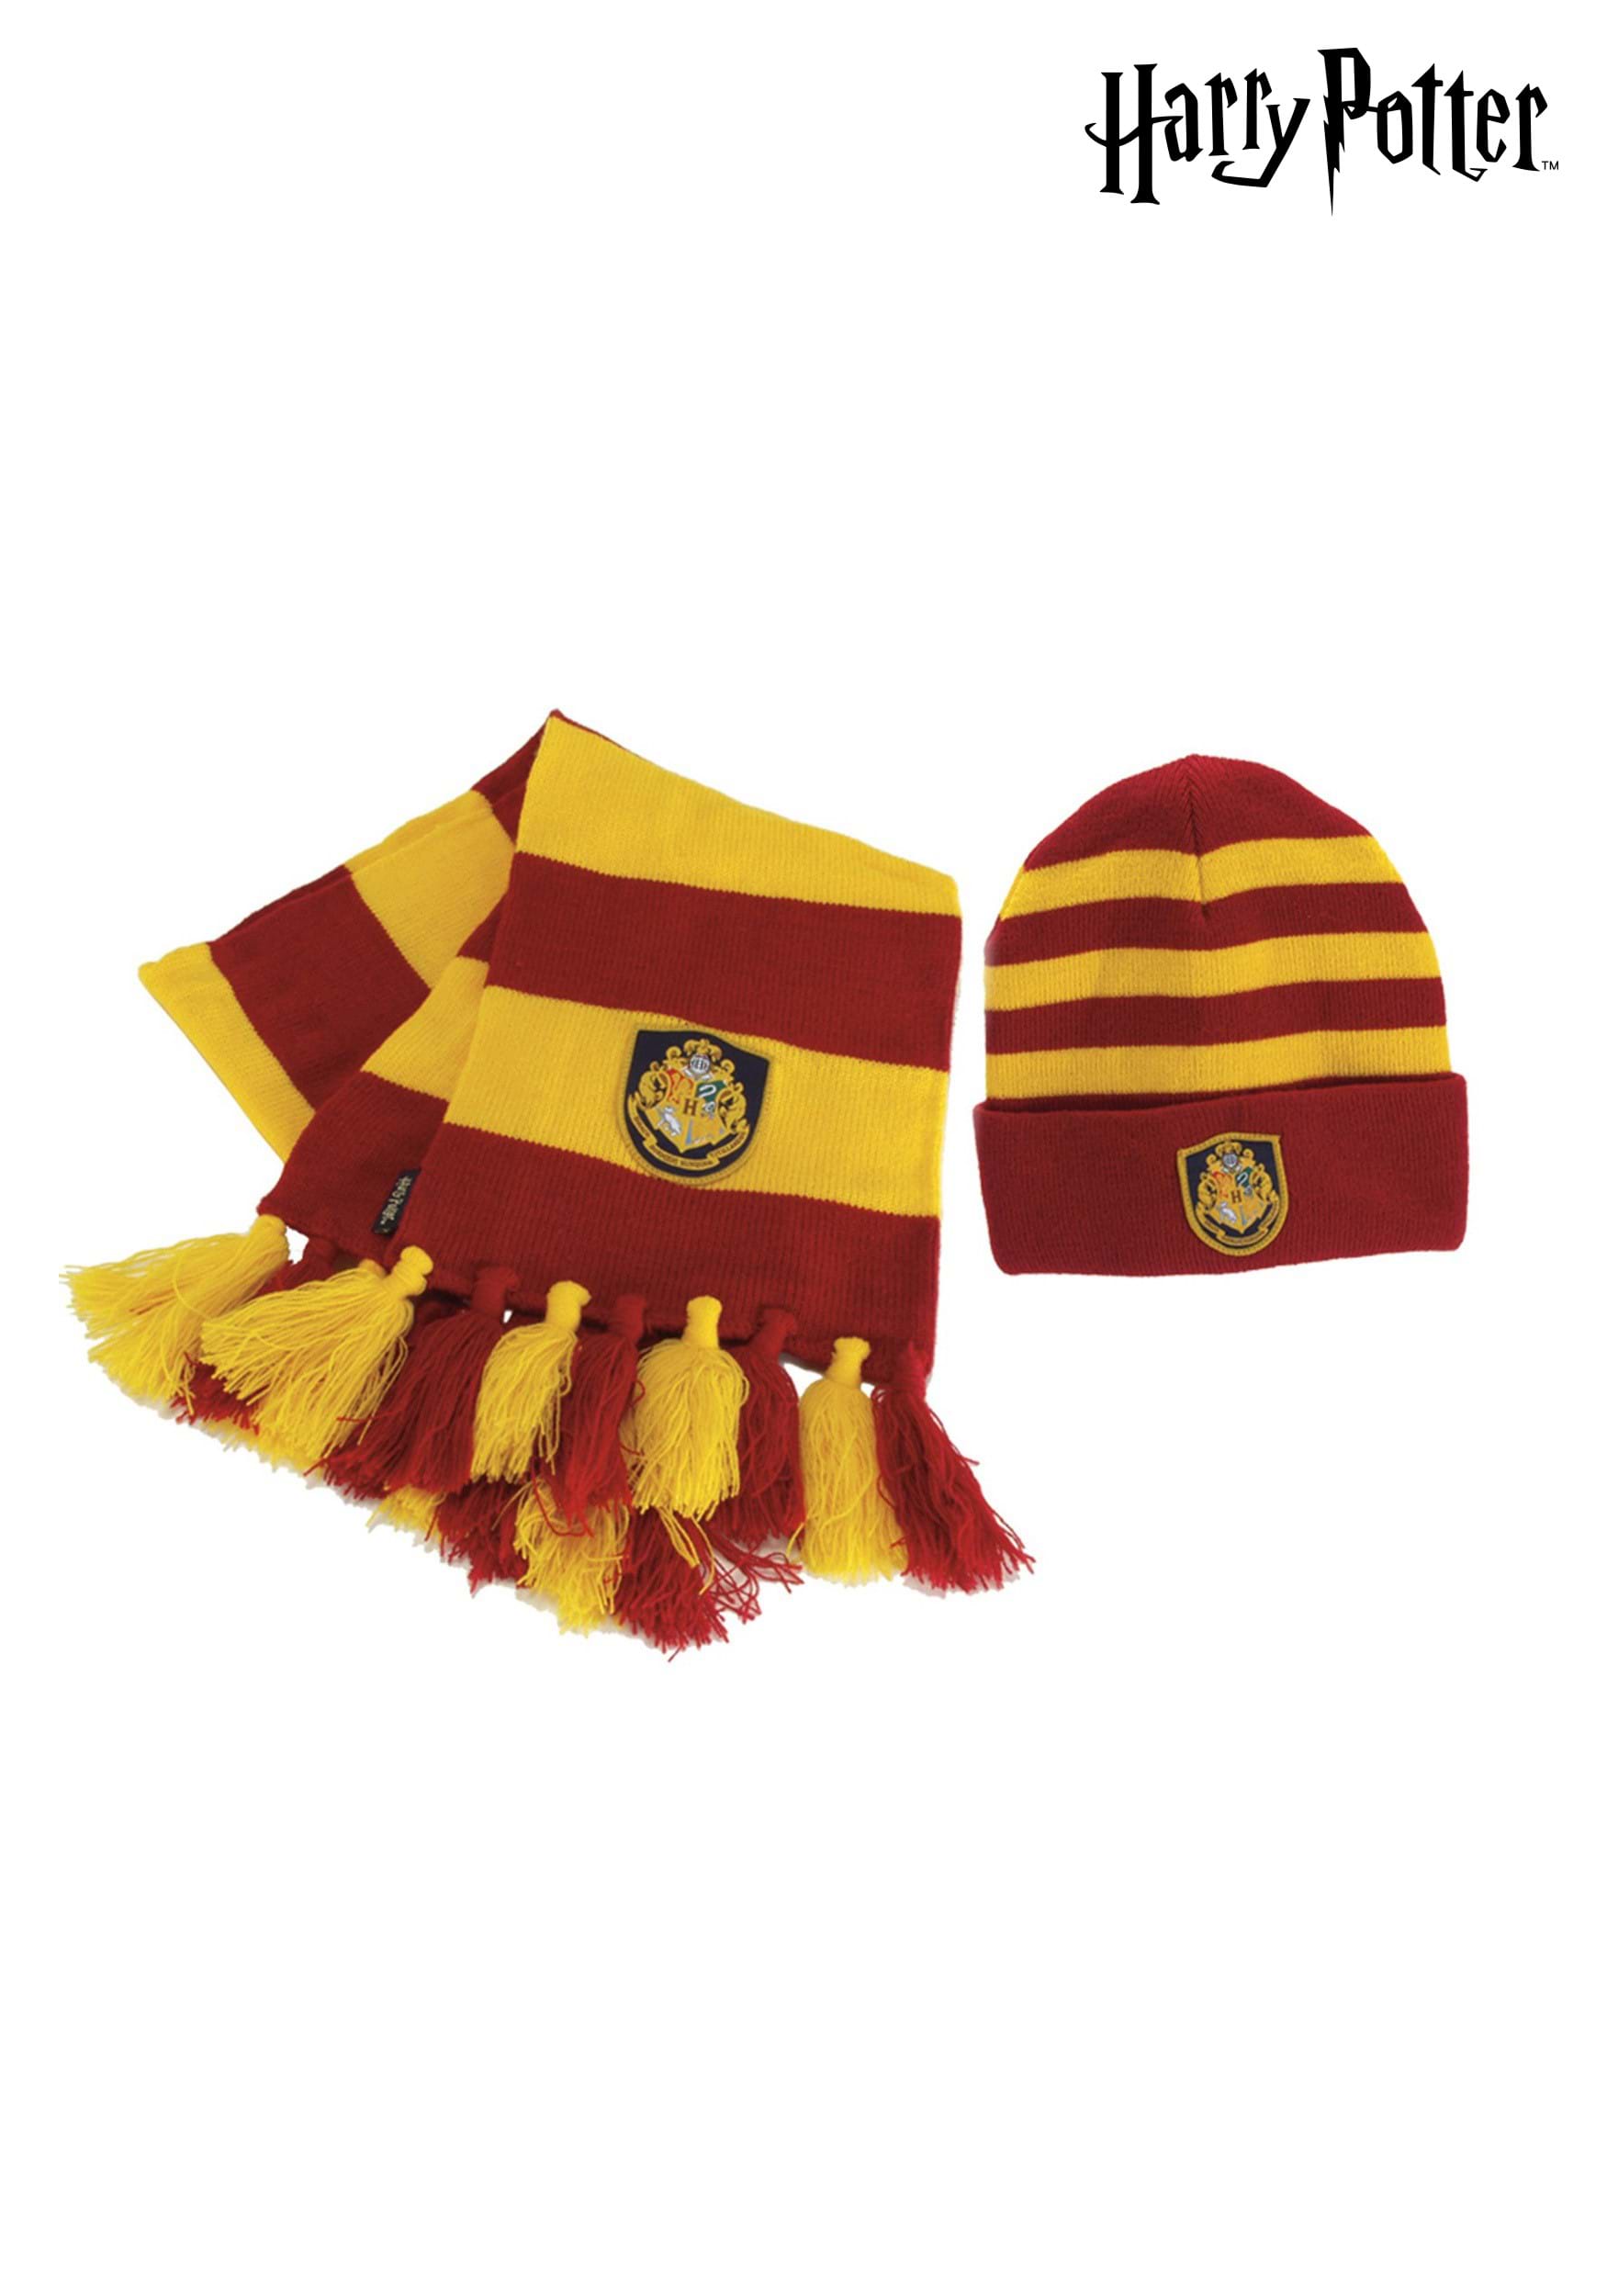 Harry Potter Hogwarts Scarf and Hat